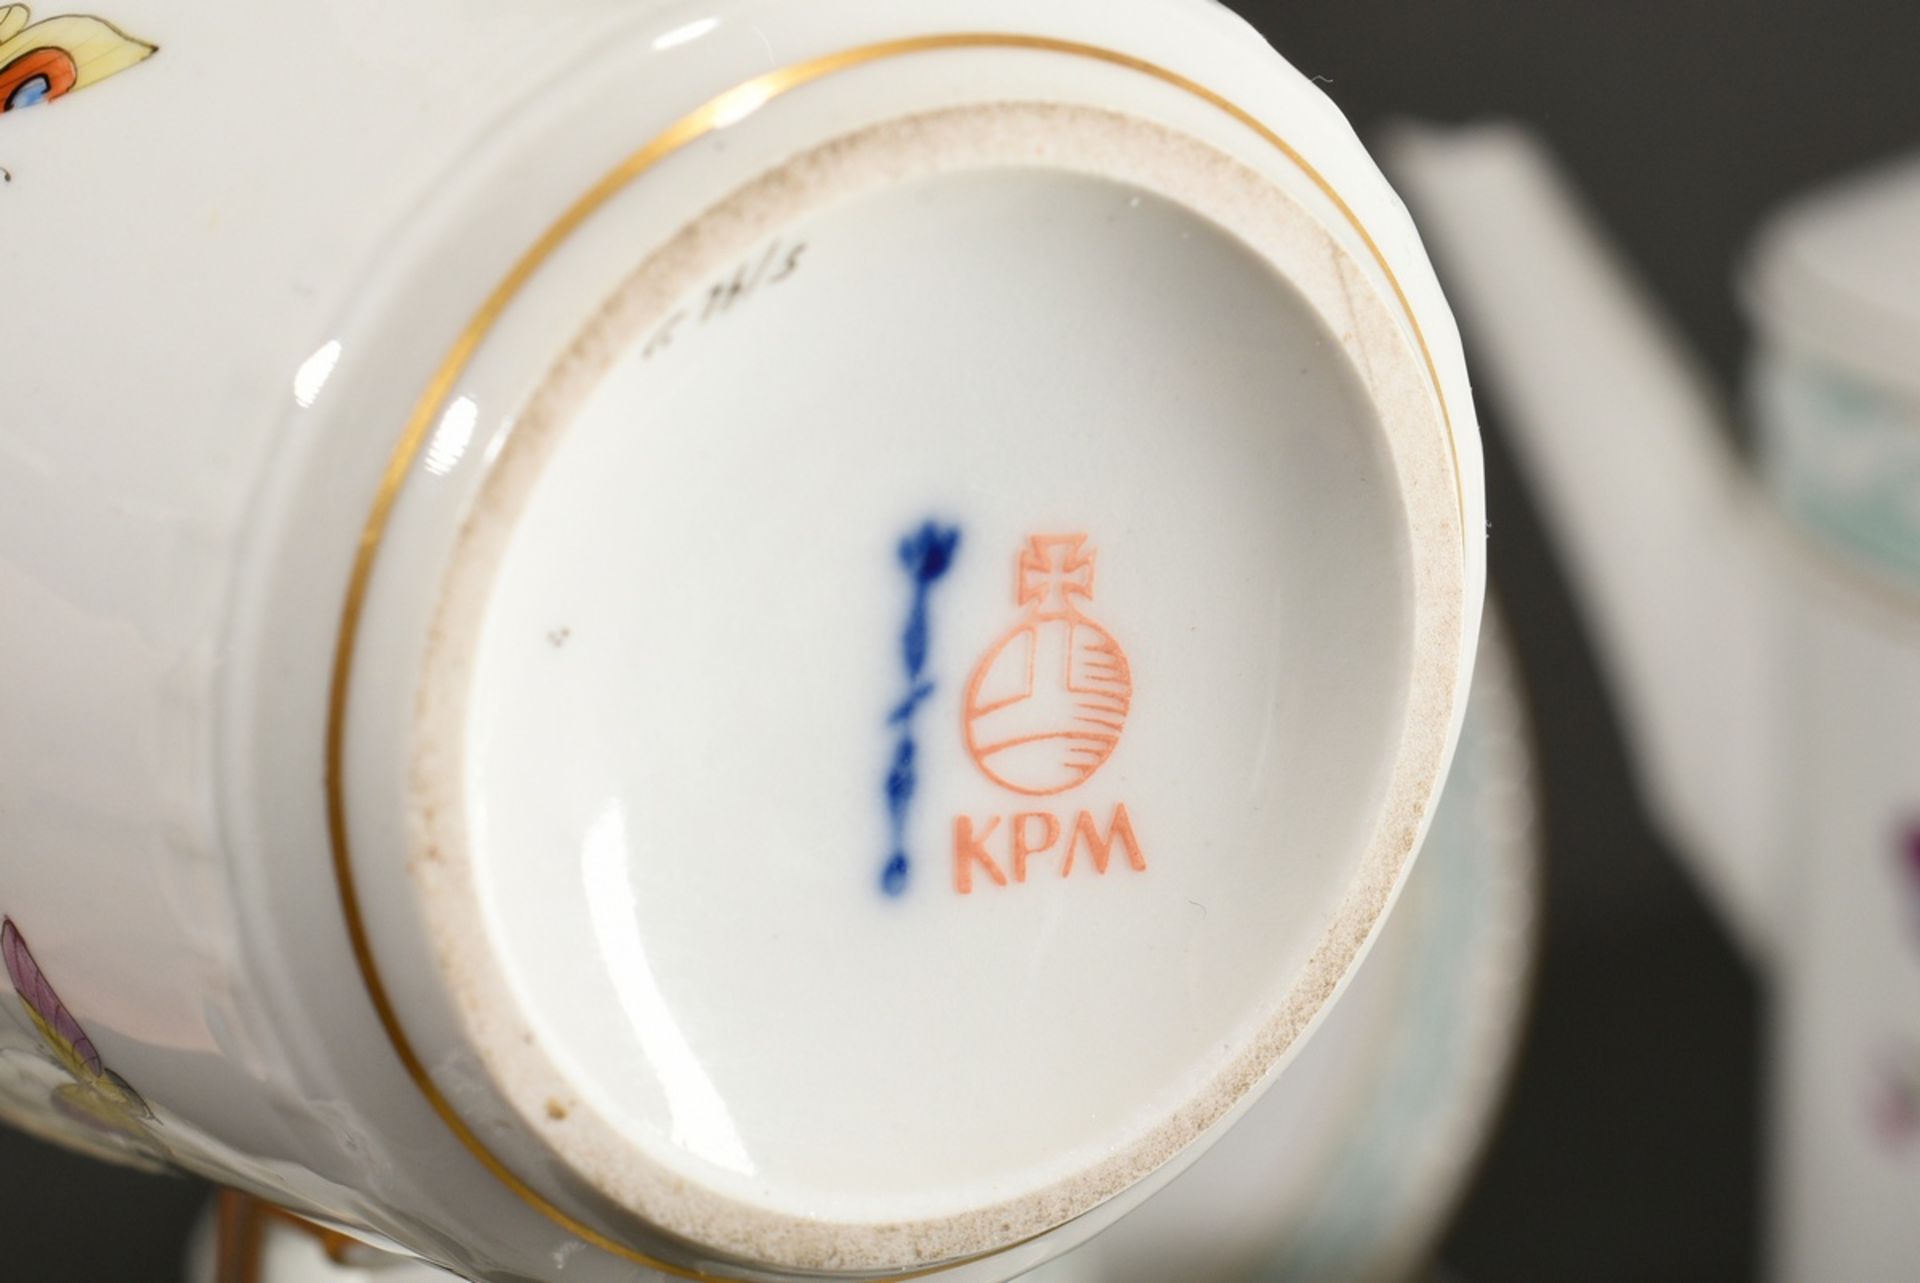 15 Pieces KPM coffee service "Kurland" with flowers and insects, gold staffage and turquoise frieze - Image 9 of 10